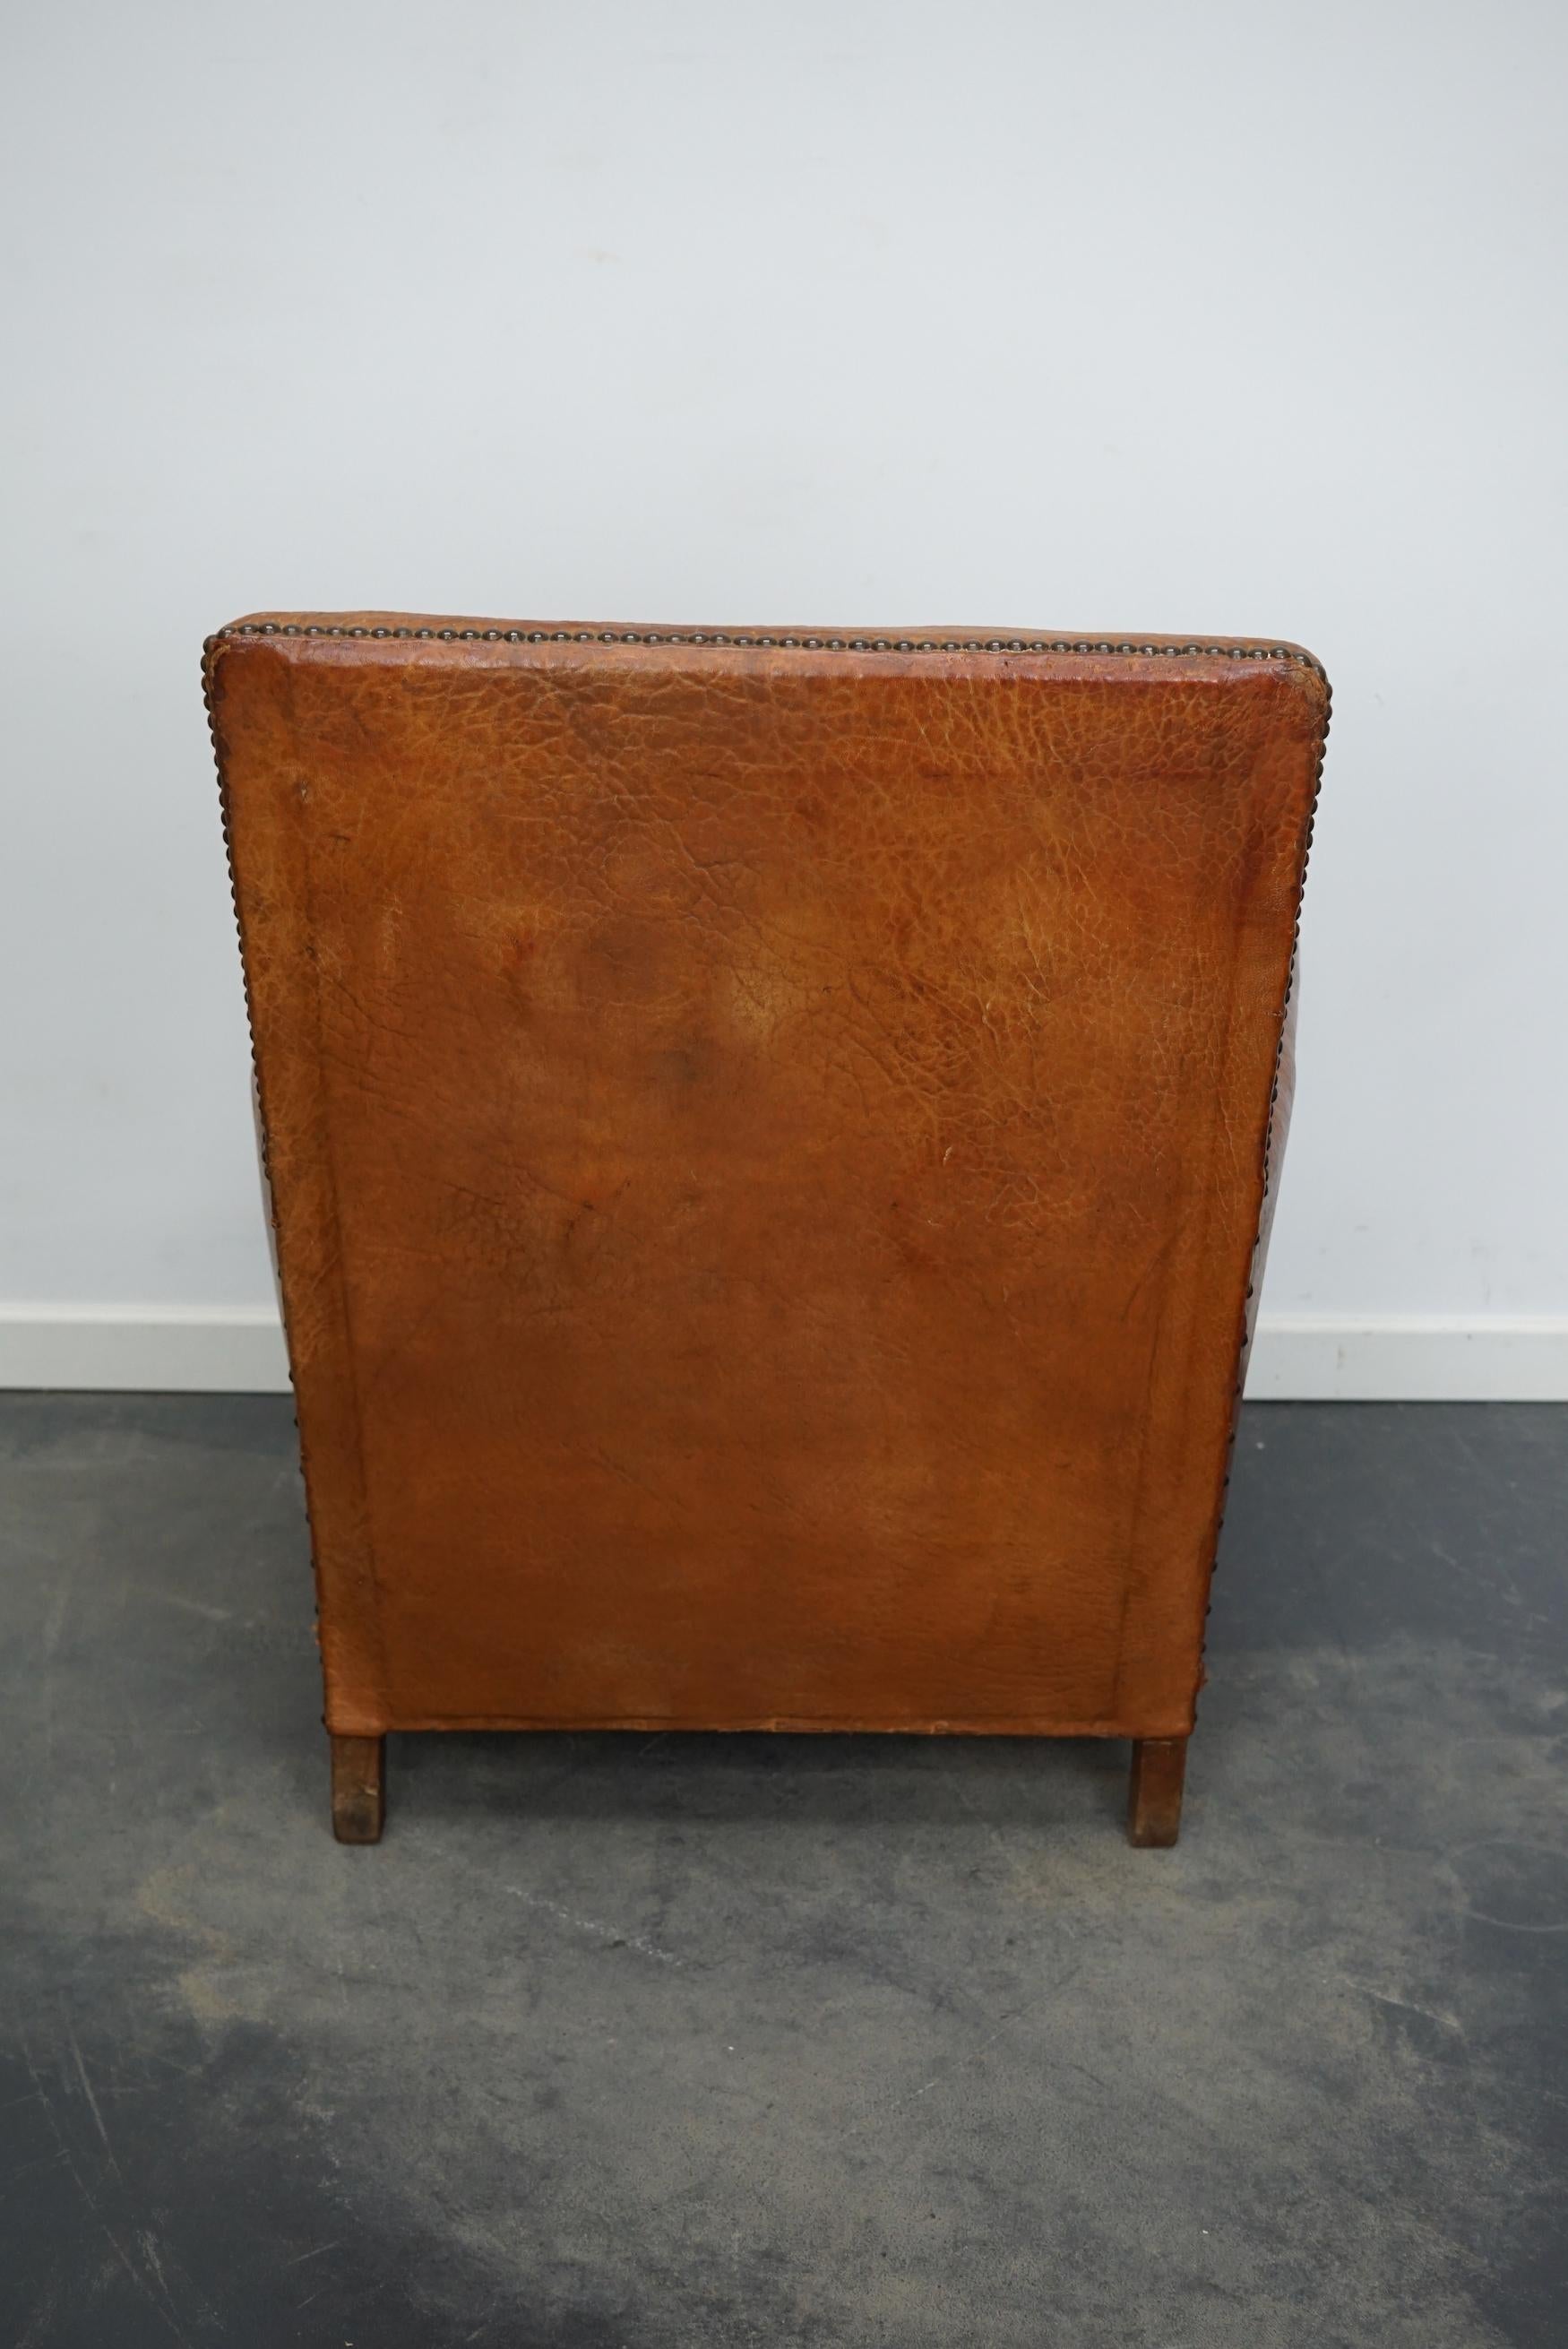 Vintage French Cognac-Colored Leather Club Chair, 1940s For Sale 4